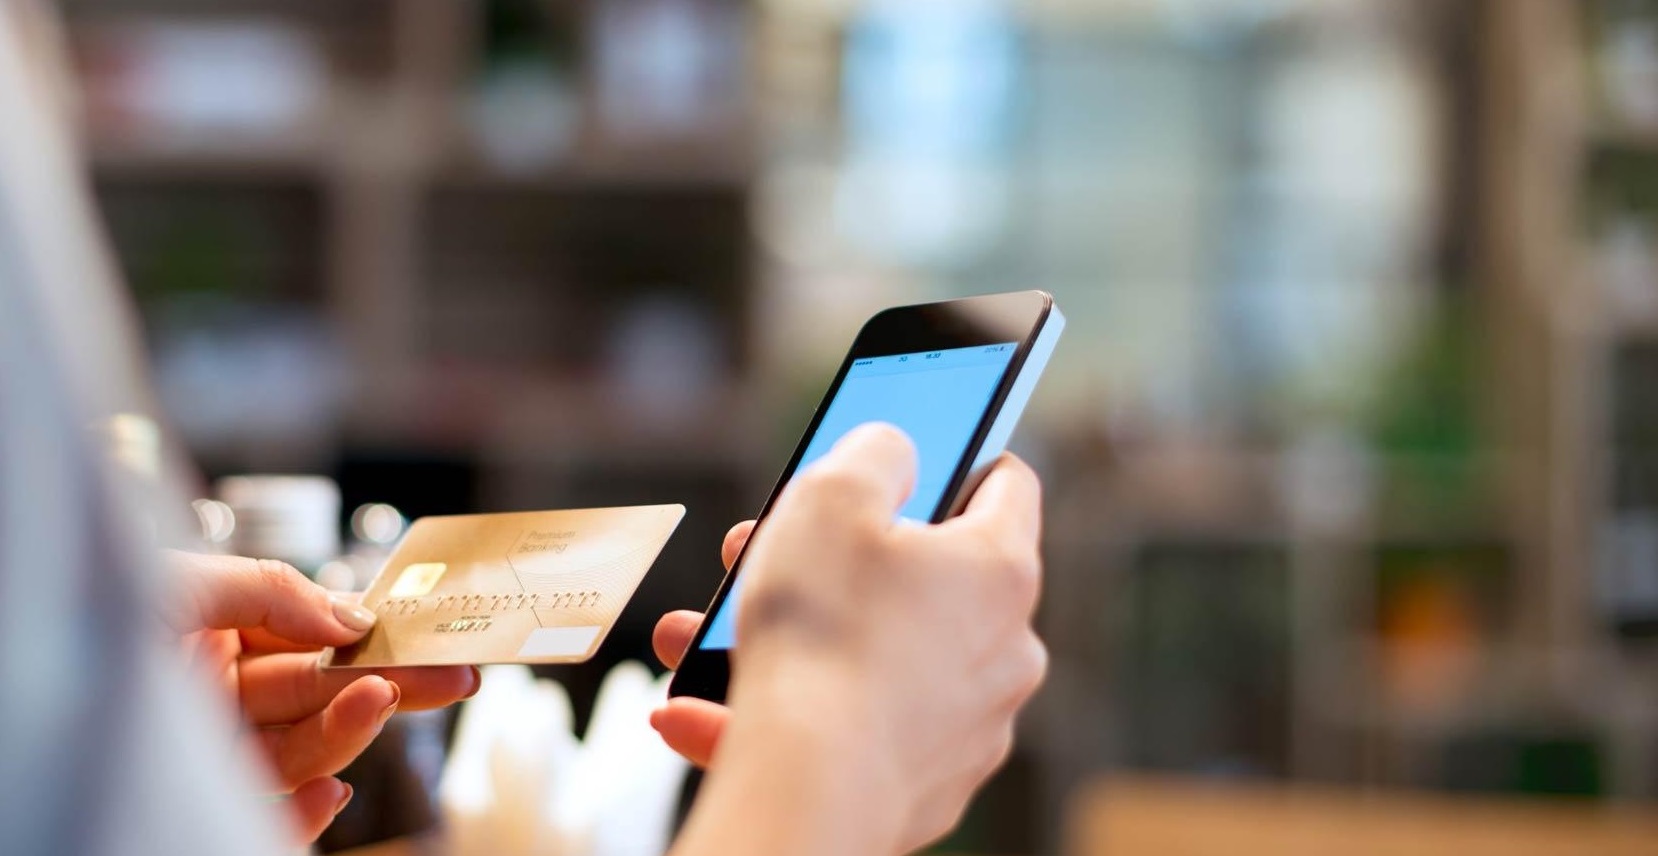 TOP 6 PAYMENT PROCESSING CHALLENGES FOR BUSINESSES